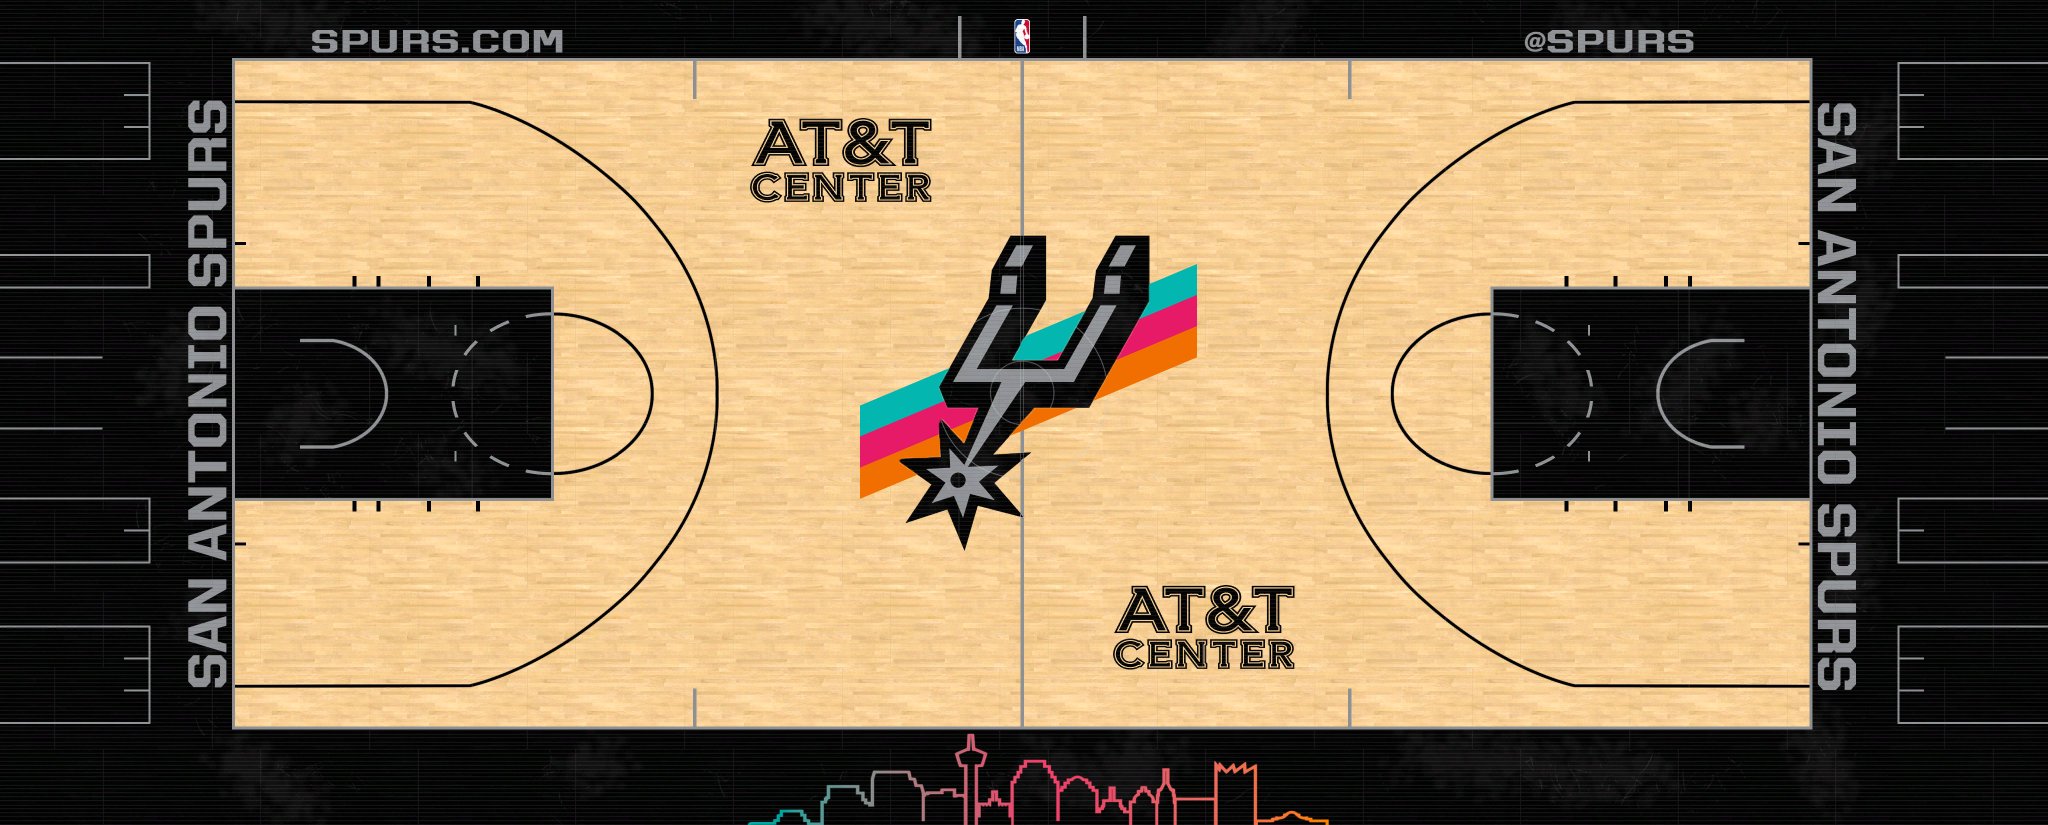 I'd Buy This Spurs Fiesta Colors Jersey So Hard - Page 4